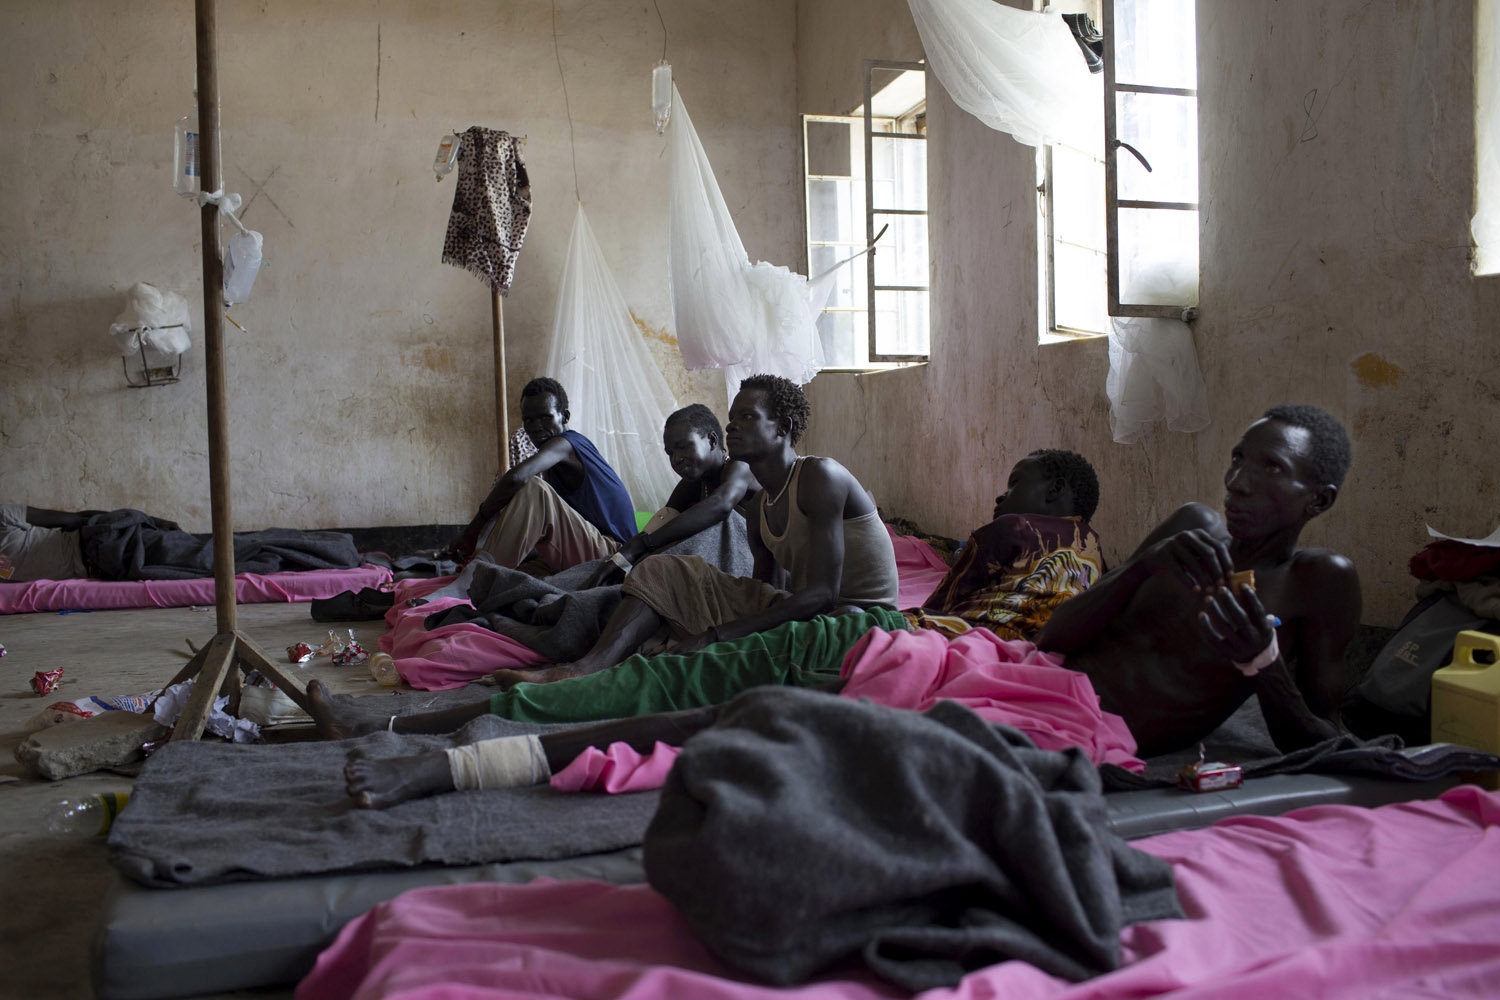 July 15, 2013. People wounded in tribal clashes are seen in Bor hospital, Jonglei state, South Sudan.